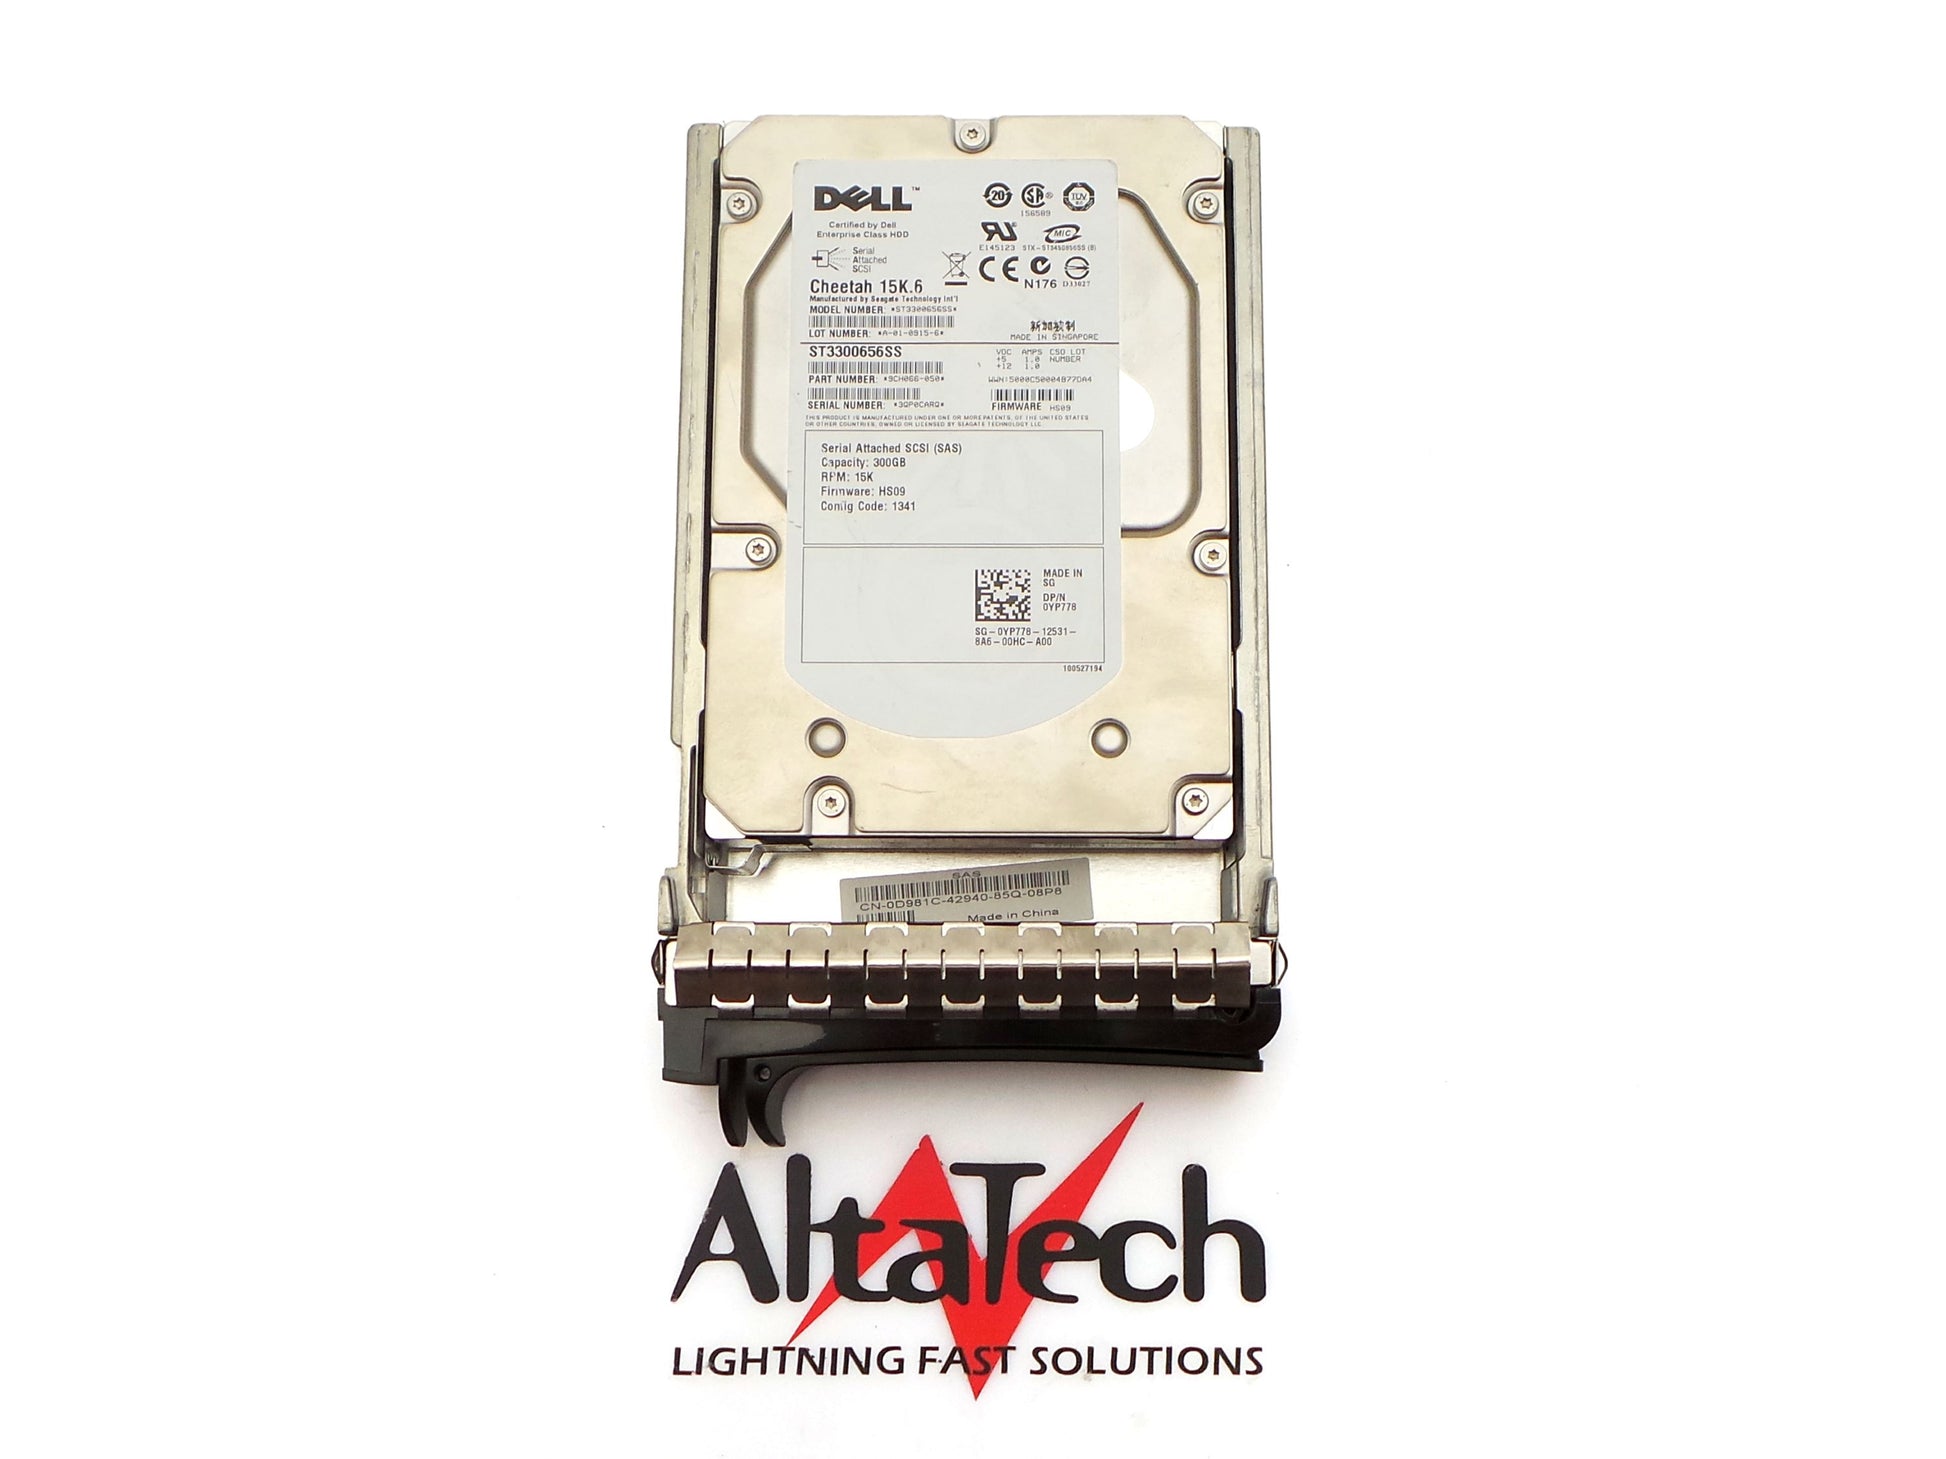 Seagate ST3300656SS Seagate ST3300656SS 300GB 15K SAS 3.5 3G HDD Dell 9CH066-050 Hard Disk Drive, Used